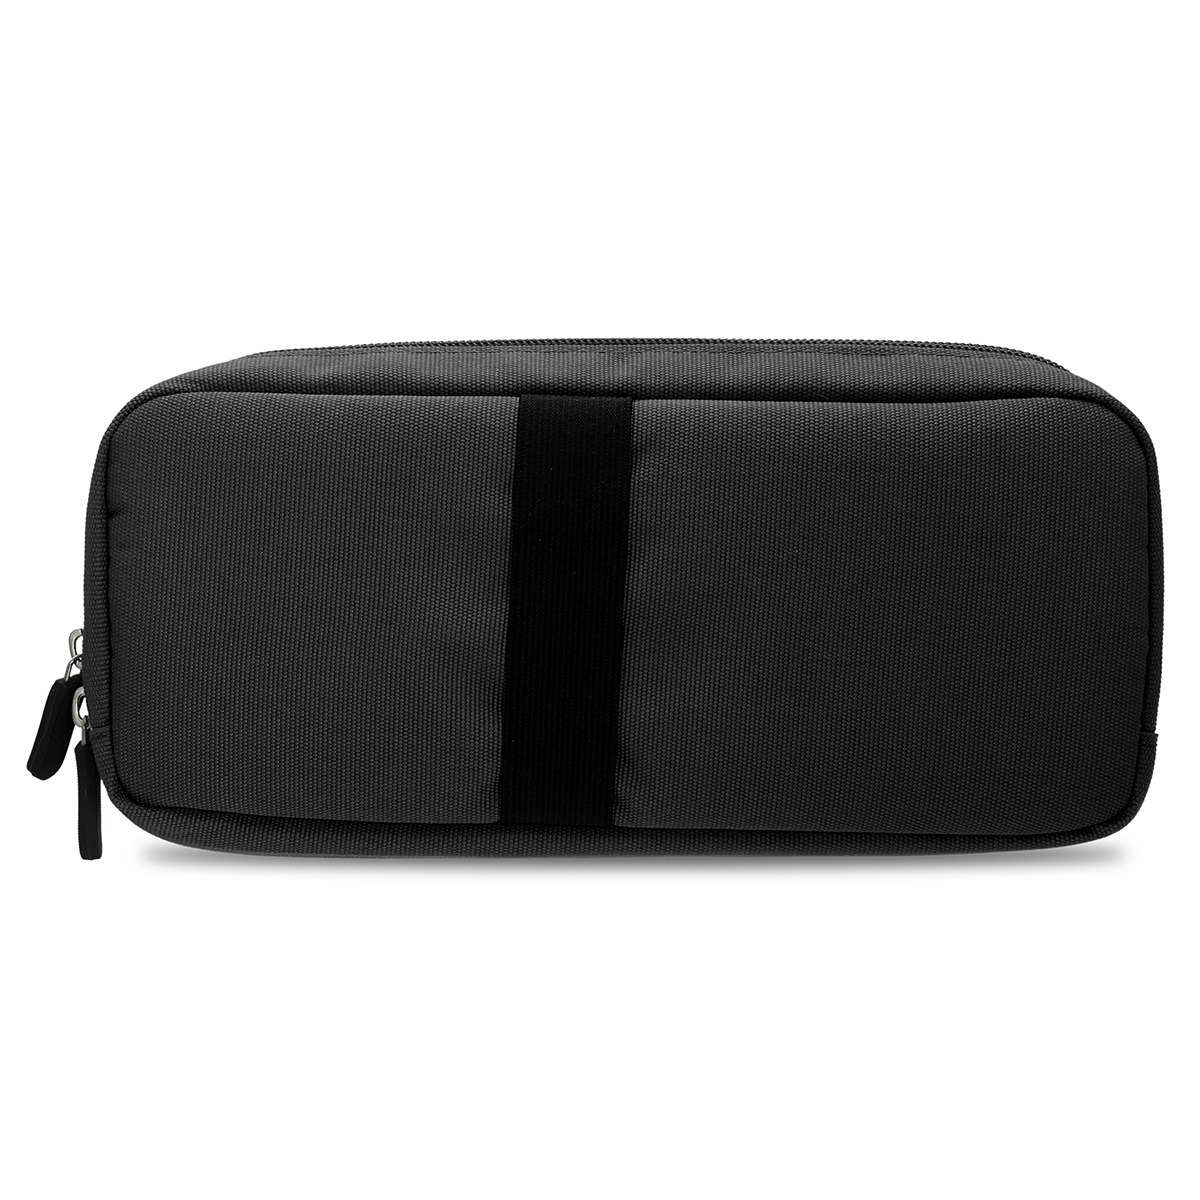 Portable Soft Protective Storage Case Bag For Nintendo Switch Game Console 11